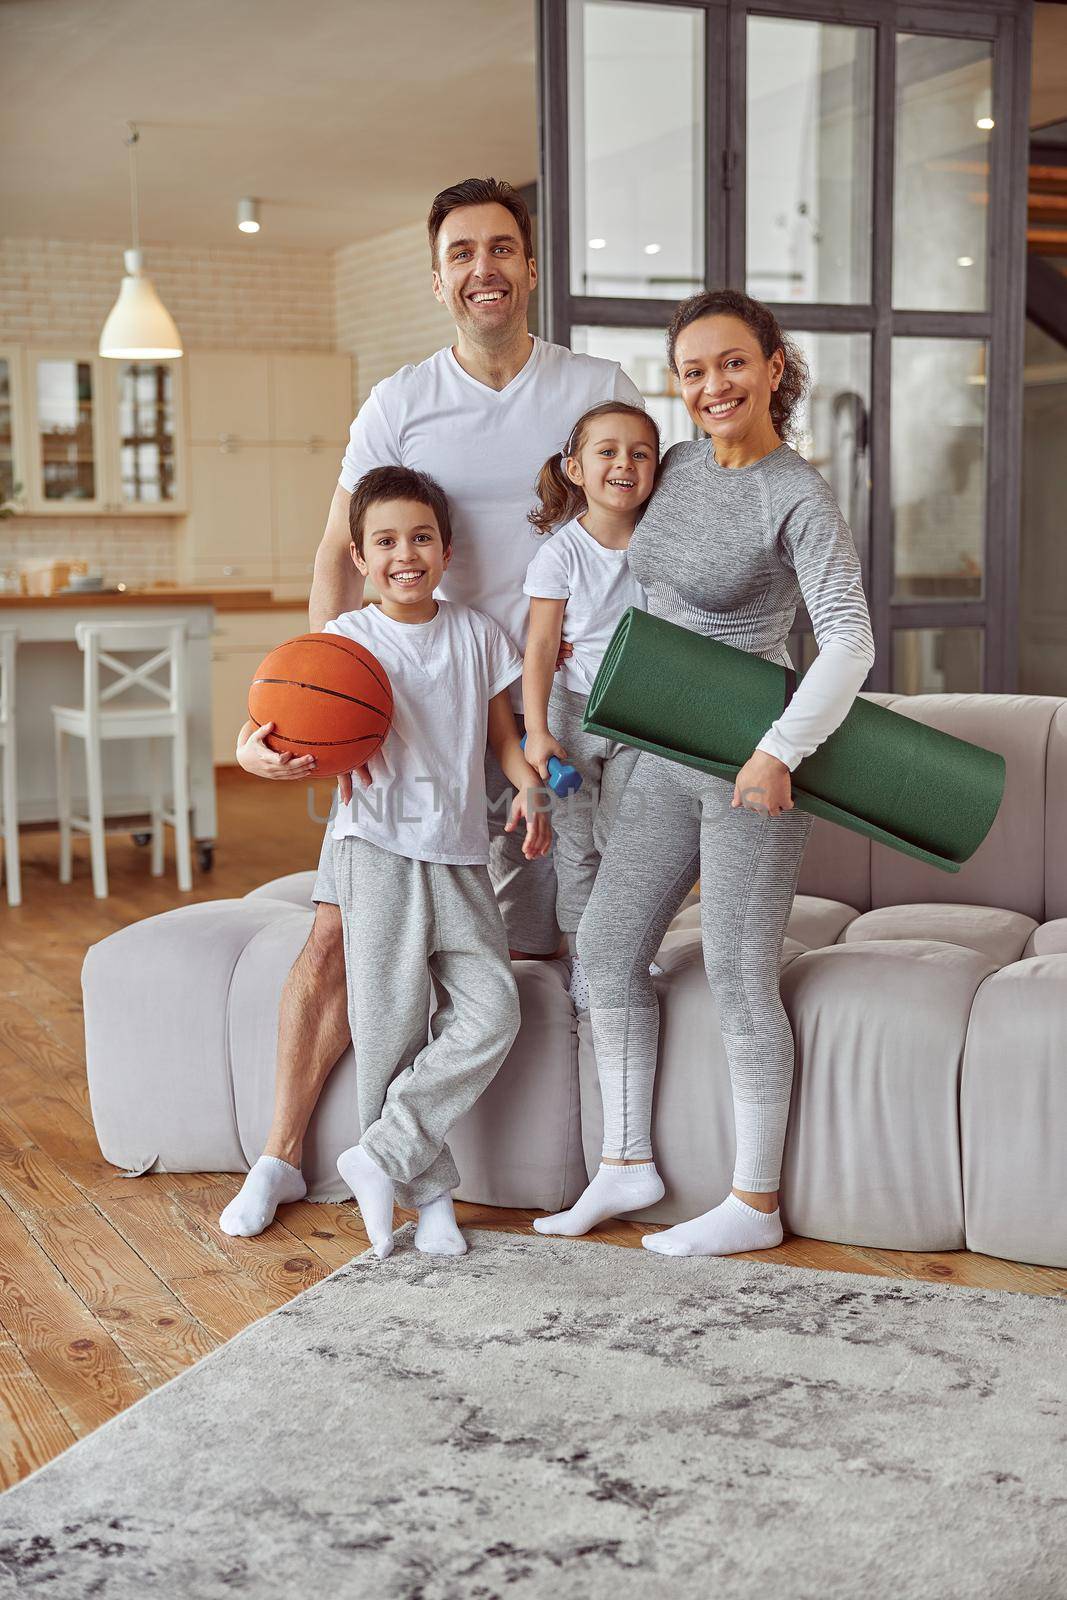 Cheerful active family doing sport at home by Yaroslav_astakhov